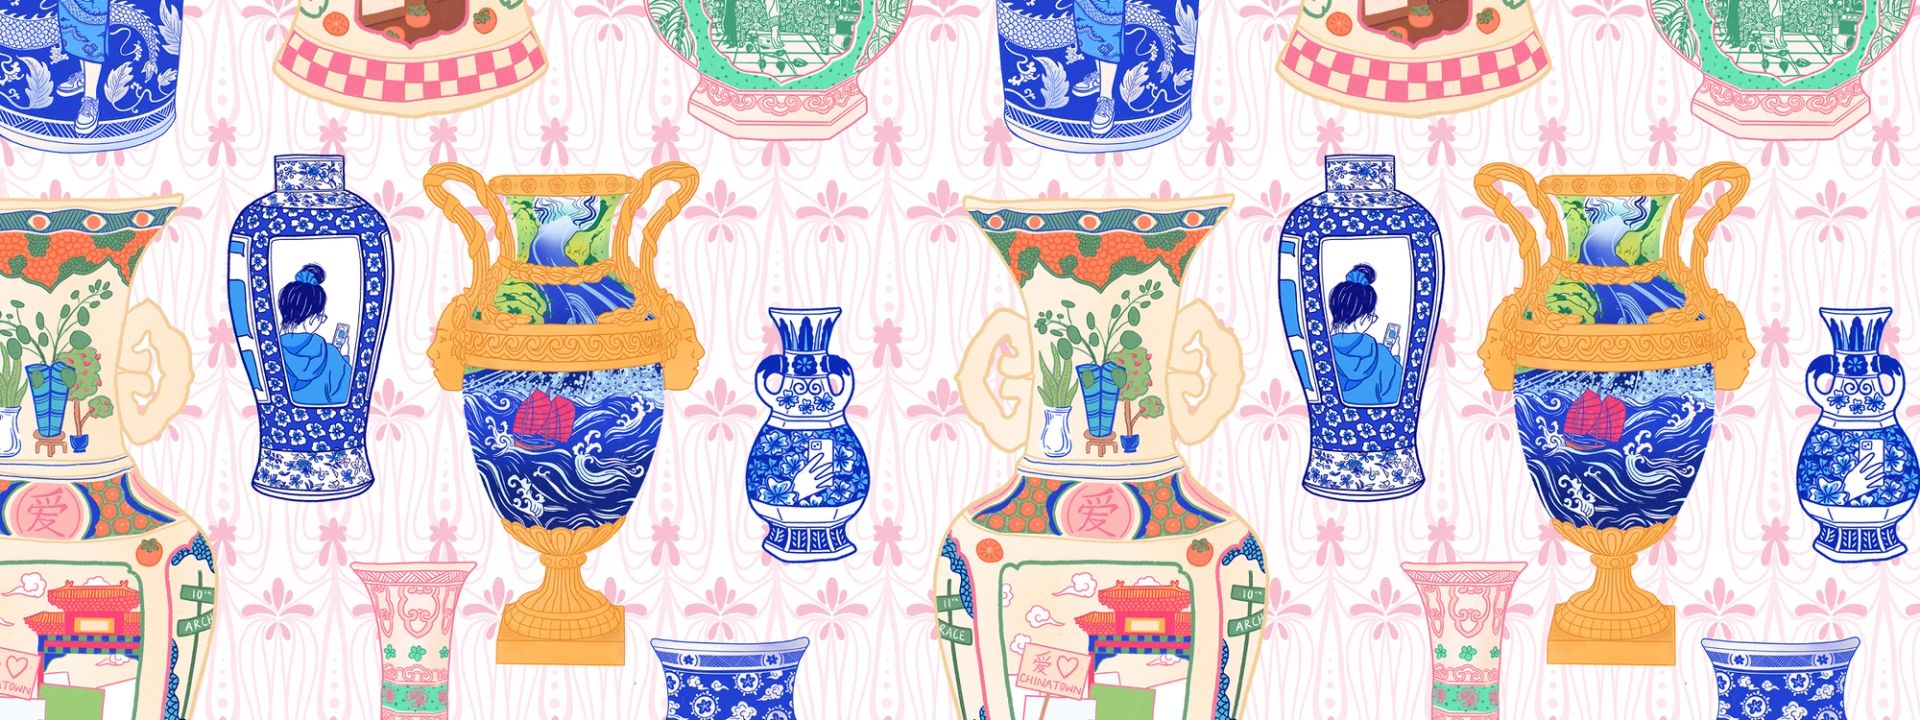 Several brightly colored vases in the style of Chinese and Japanese pottery against a pink and white background.